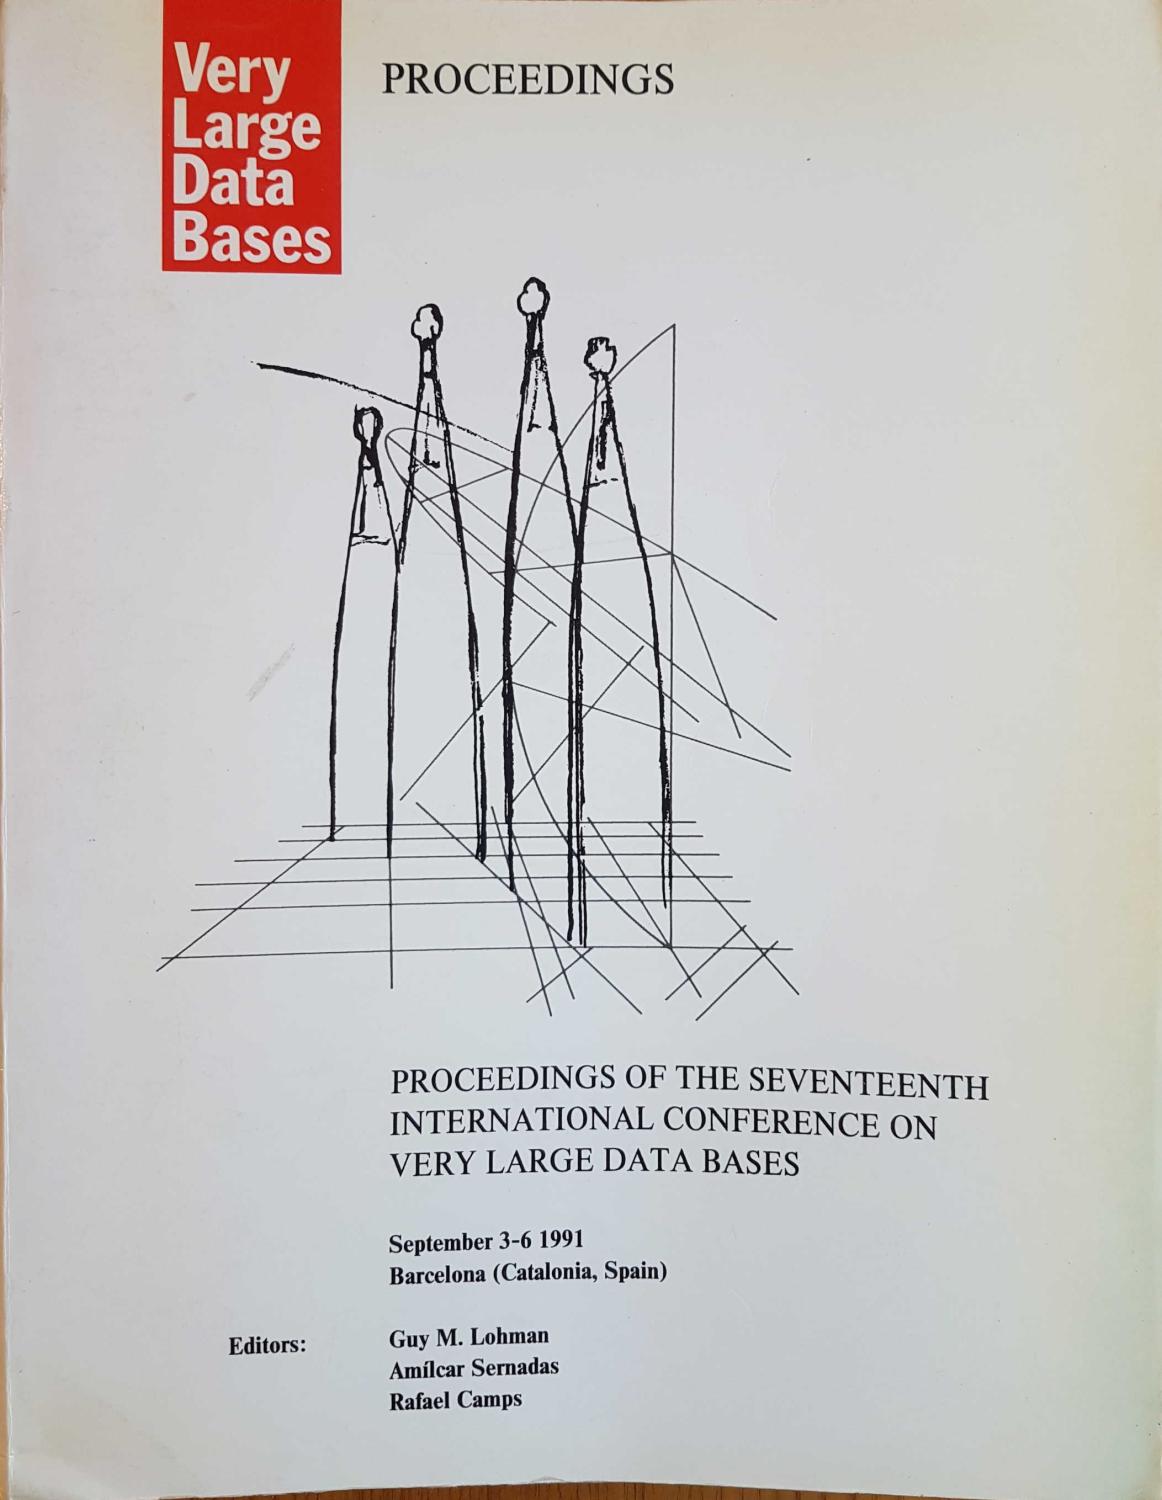 Proceedings of the International Conference on Very Large Data Bases: VLDB 91 September 3-6 1991 Barcelona - Morgan Kaufmann Publishers